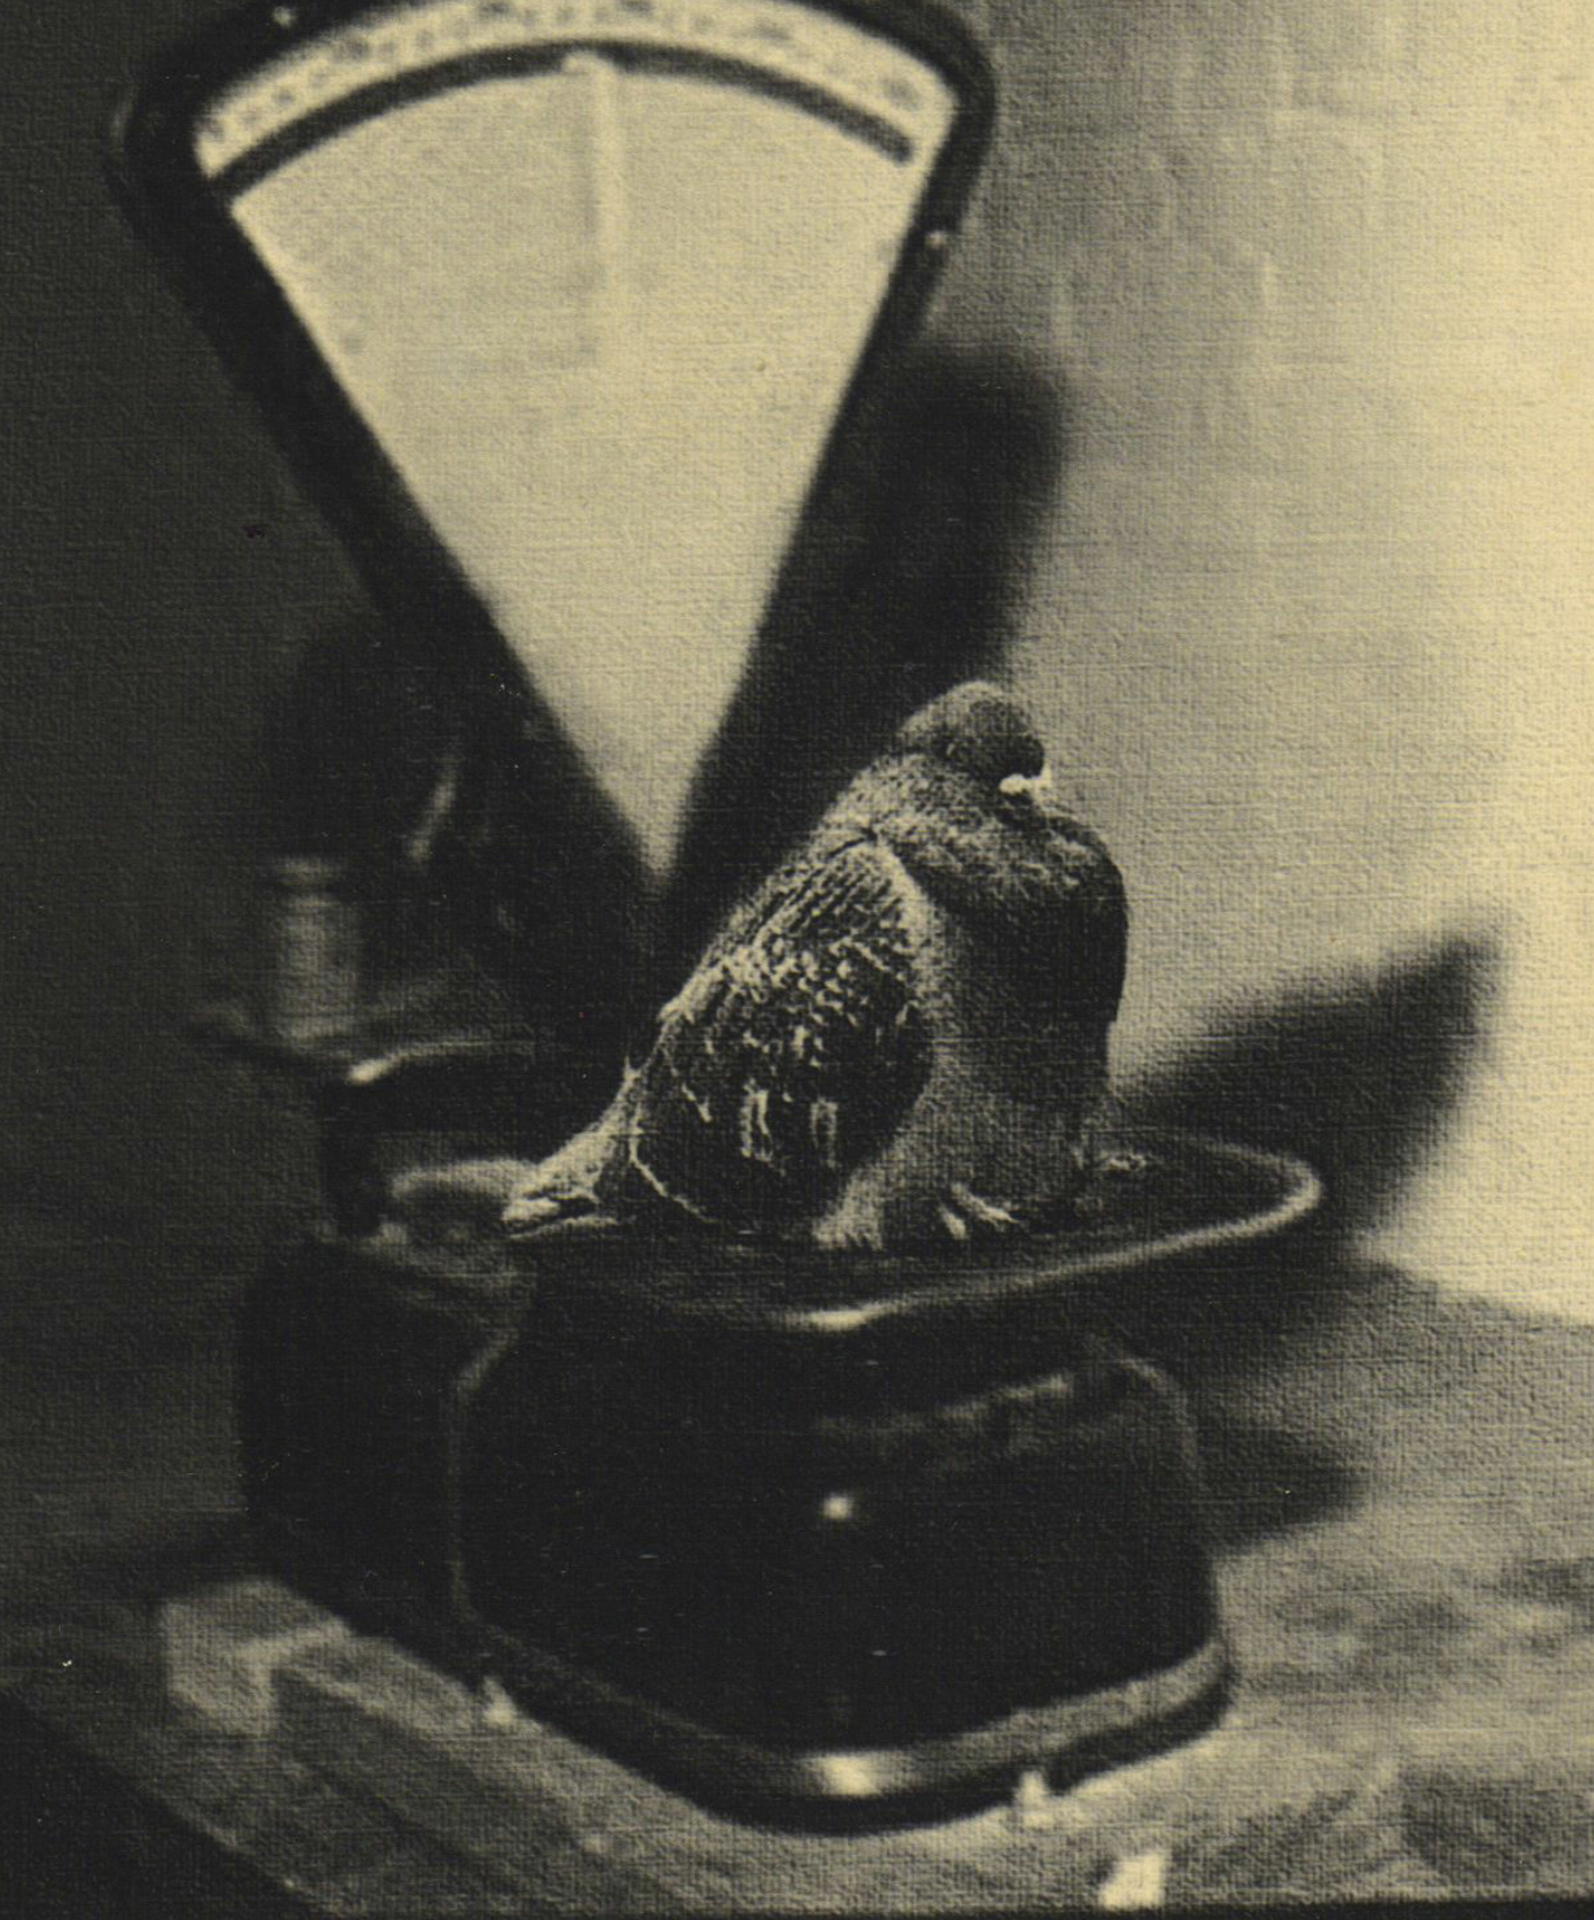 Spy-pigeon before going on a mission, 1942. The memoirs of Yan Khtovich, 2015-2017. This mockumentary project tells the story of Yan Khtovich, ornitologist working on the Spy Pigeon project during WWII